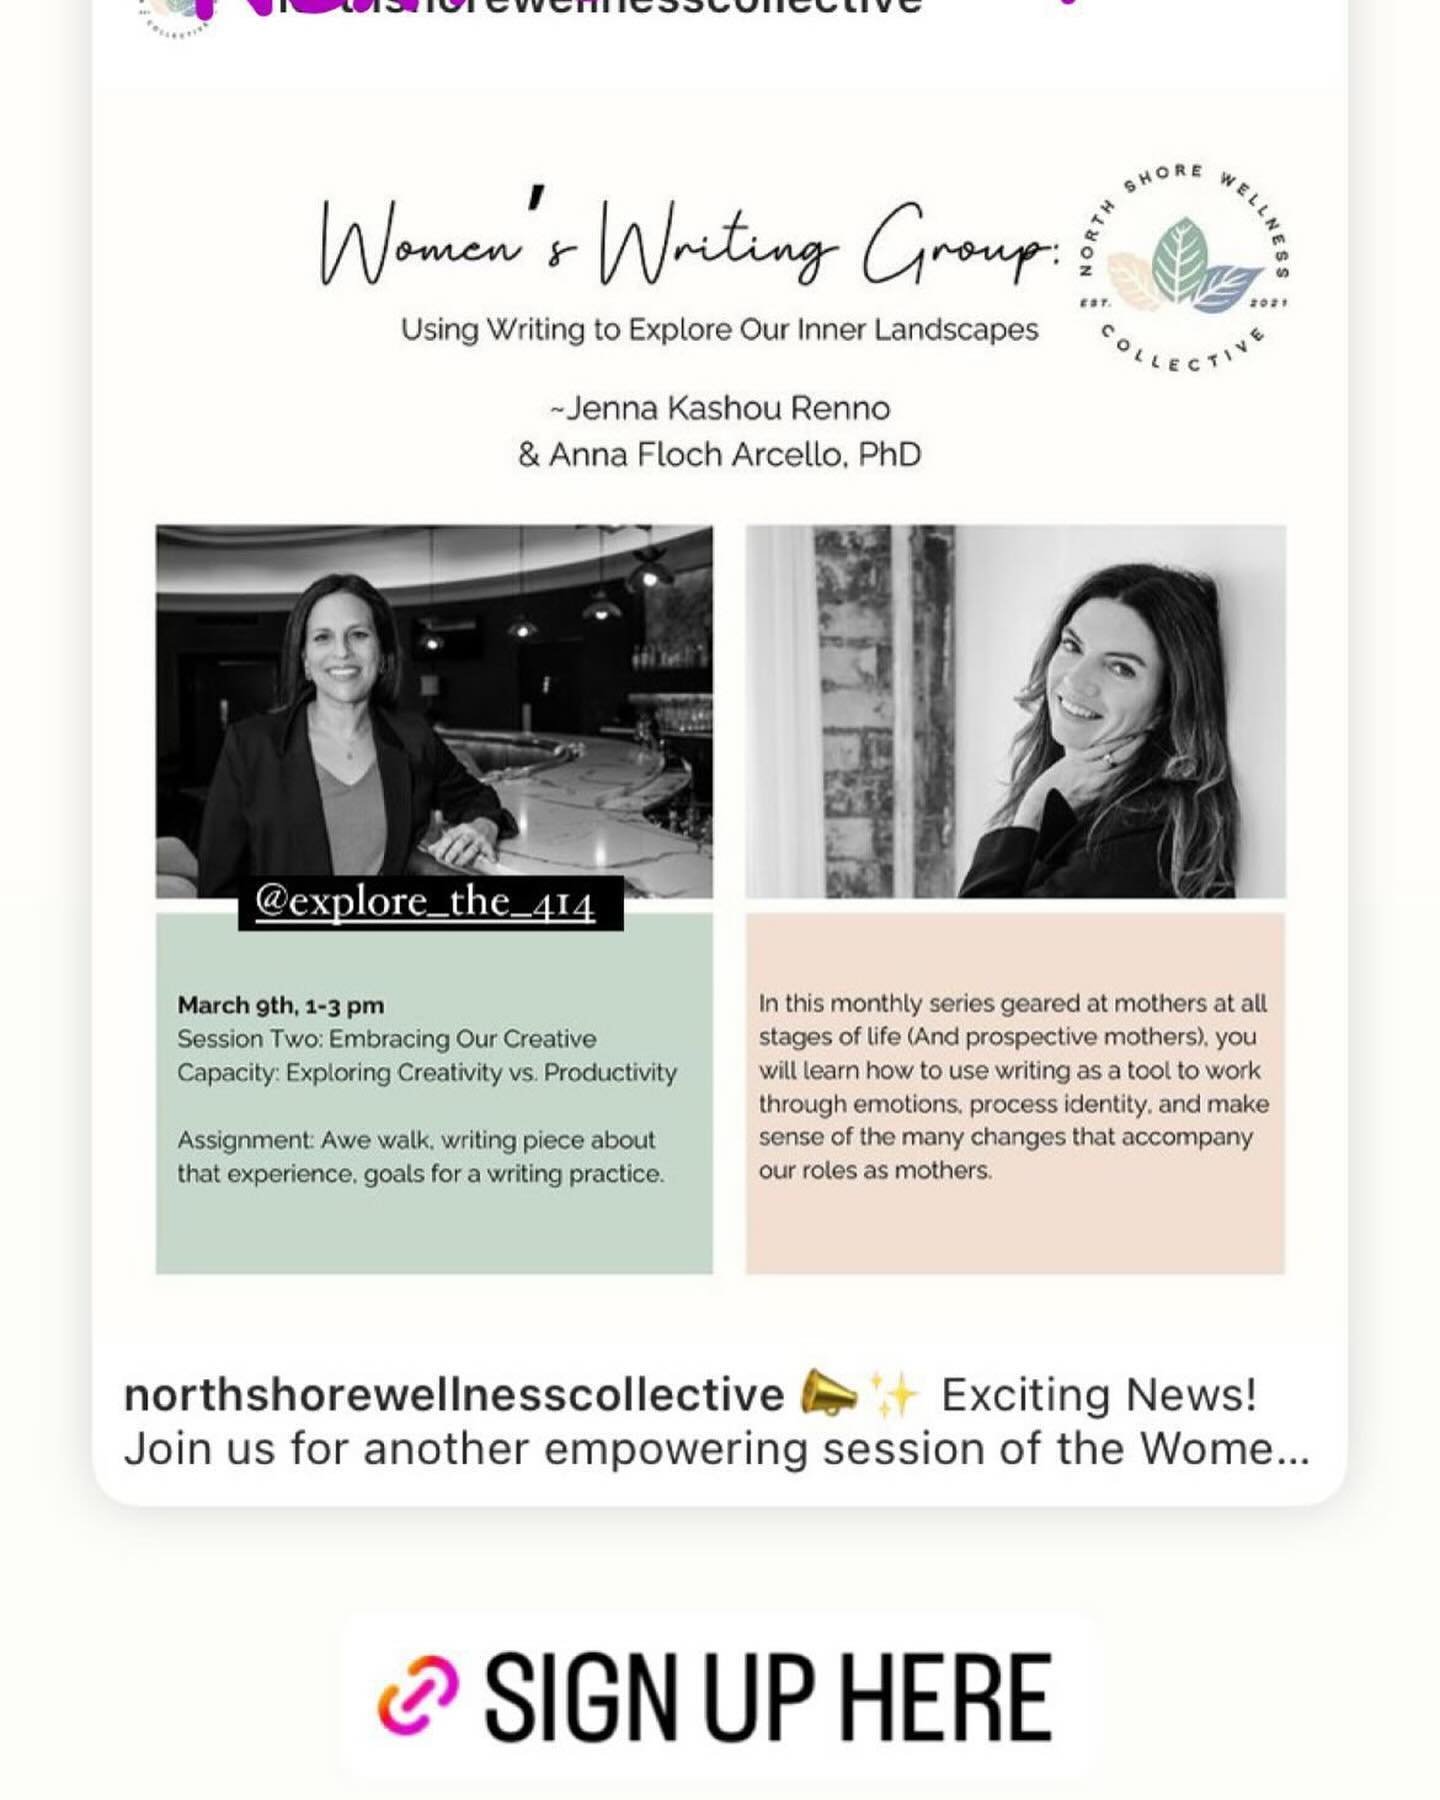 In honor of #internationalwomensday invest in yourself and join us Saturday @northshorewellnesscollective to connect with other likeminded women. 💜 we&rsquo;re fun :)